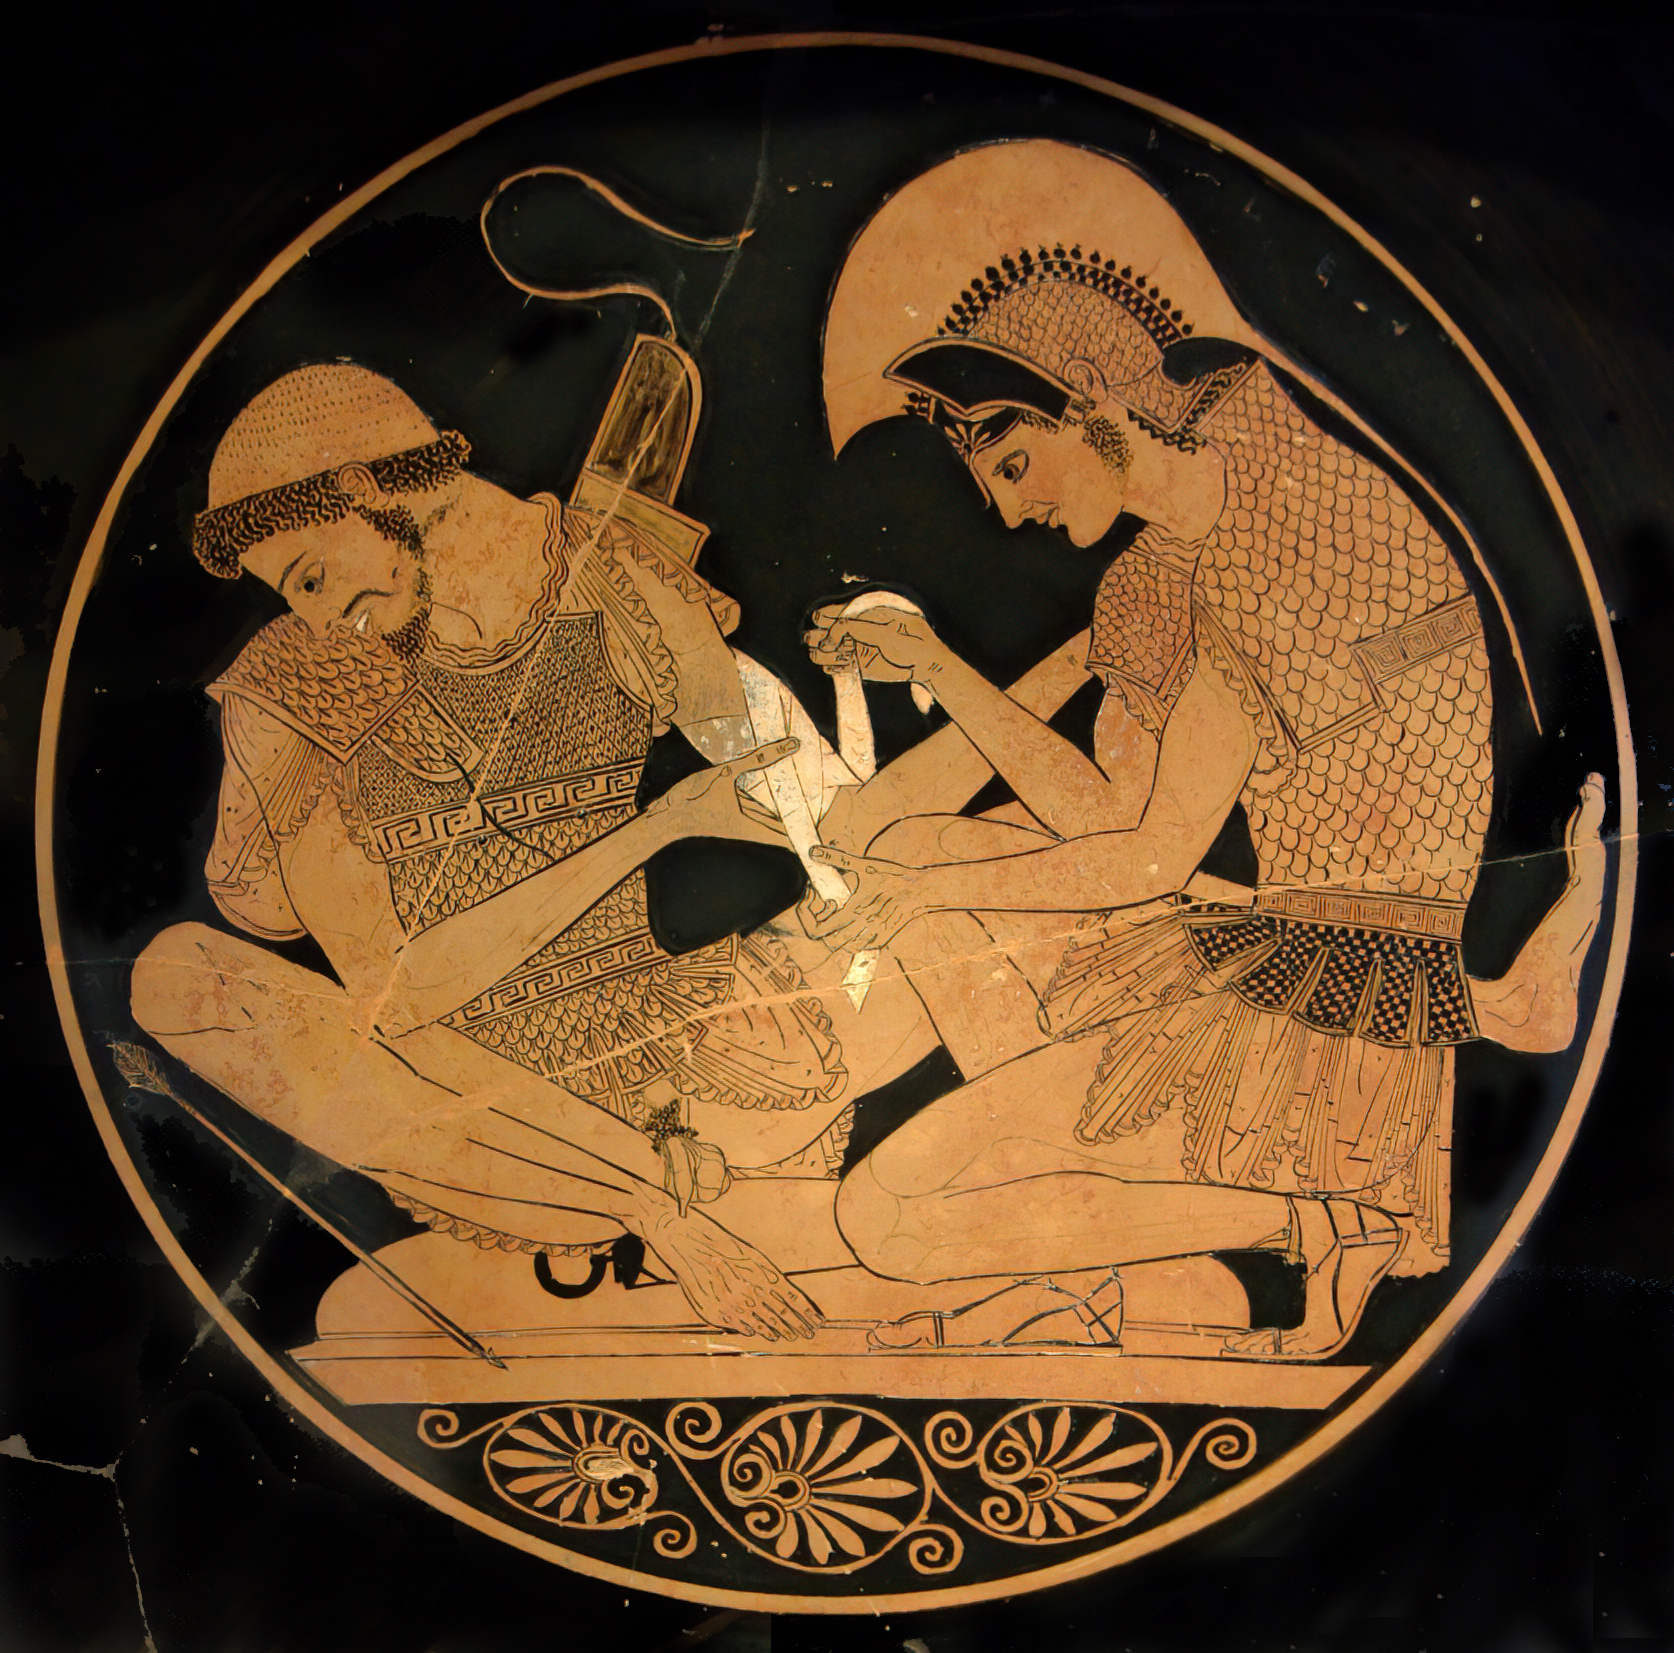 Achilles, youthful and wearing a plumed helm and armour, sits and bandages the arm of Patroclus. Patroclus wears armour and a rounded cap, and is bearded.